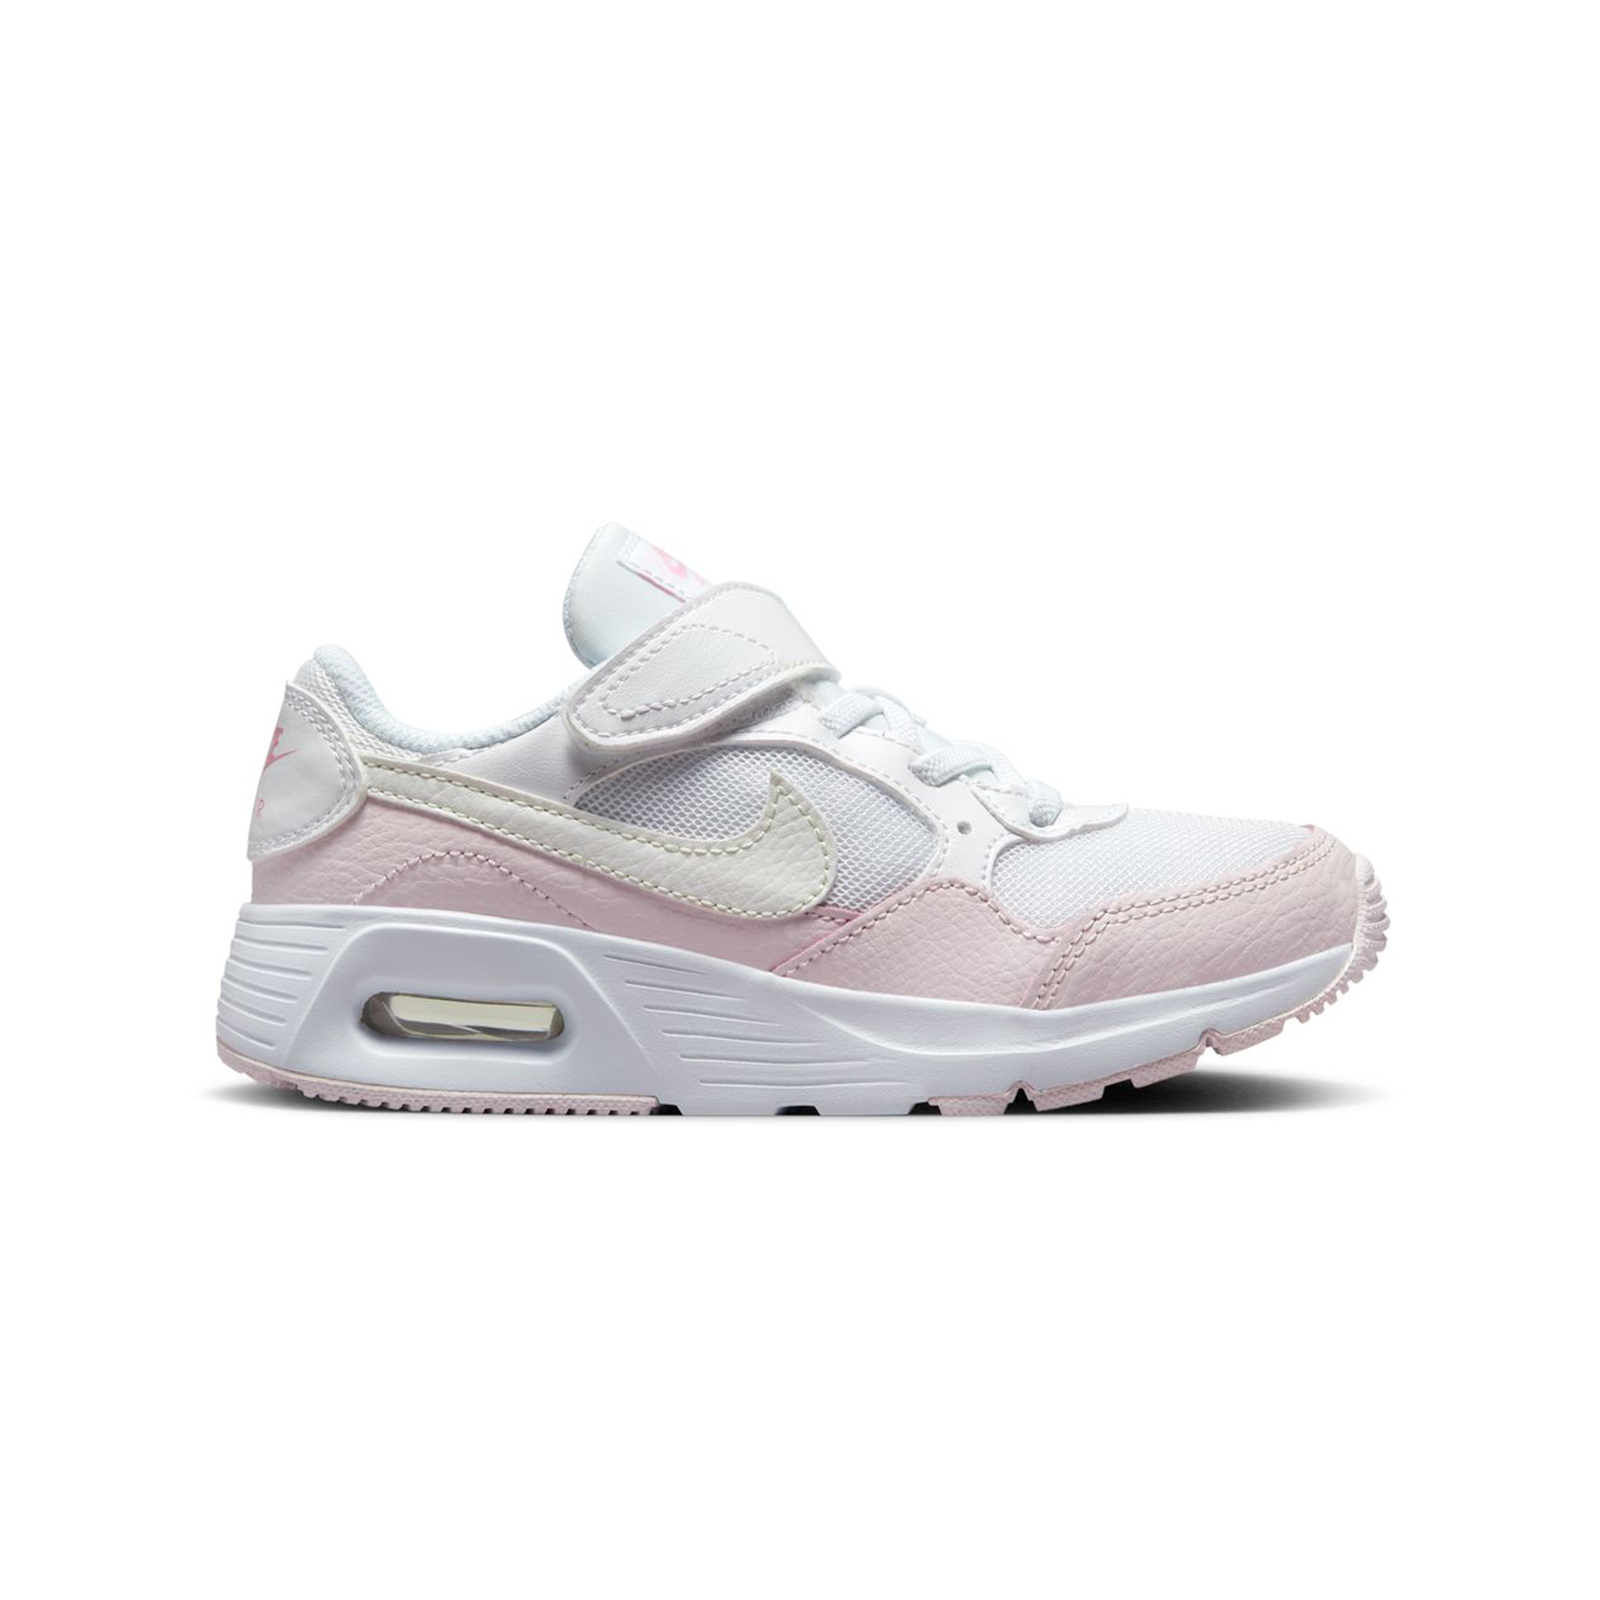 Nike - NIKE AIR MAX SC - WHITE/SUMMIT WHITE-PEARL PINK Παιδικά > Παπούτσια > Sneaker > Παπούτσι Low Cut